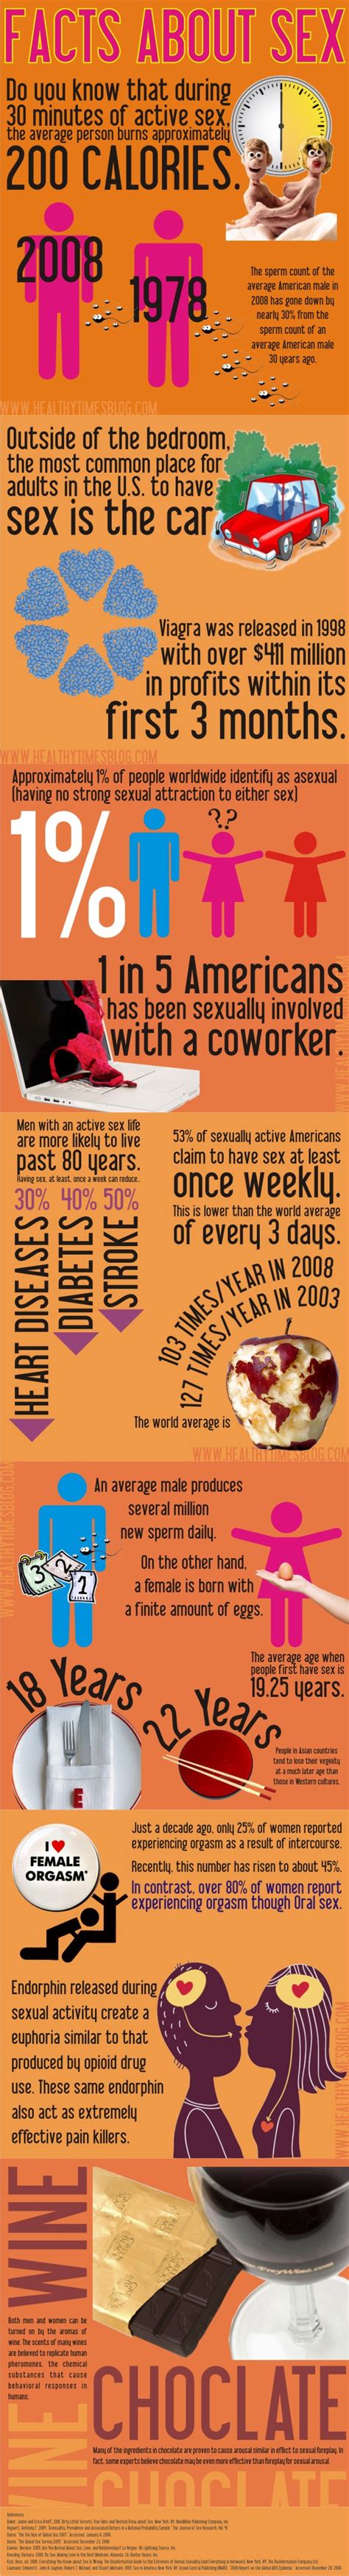 facts about sex [infographic] infographic list